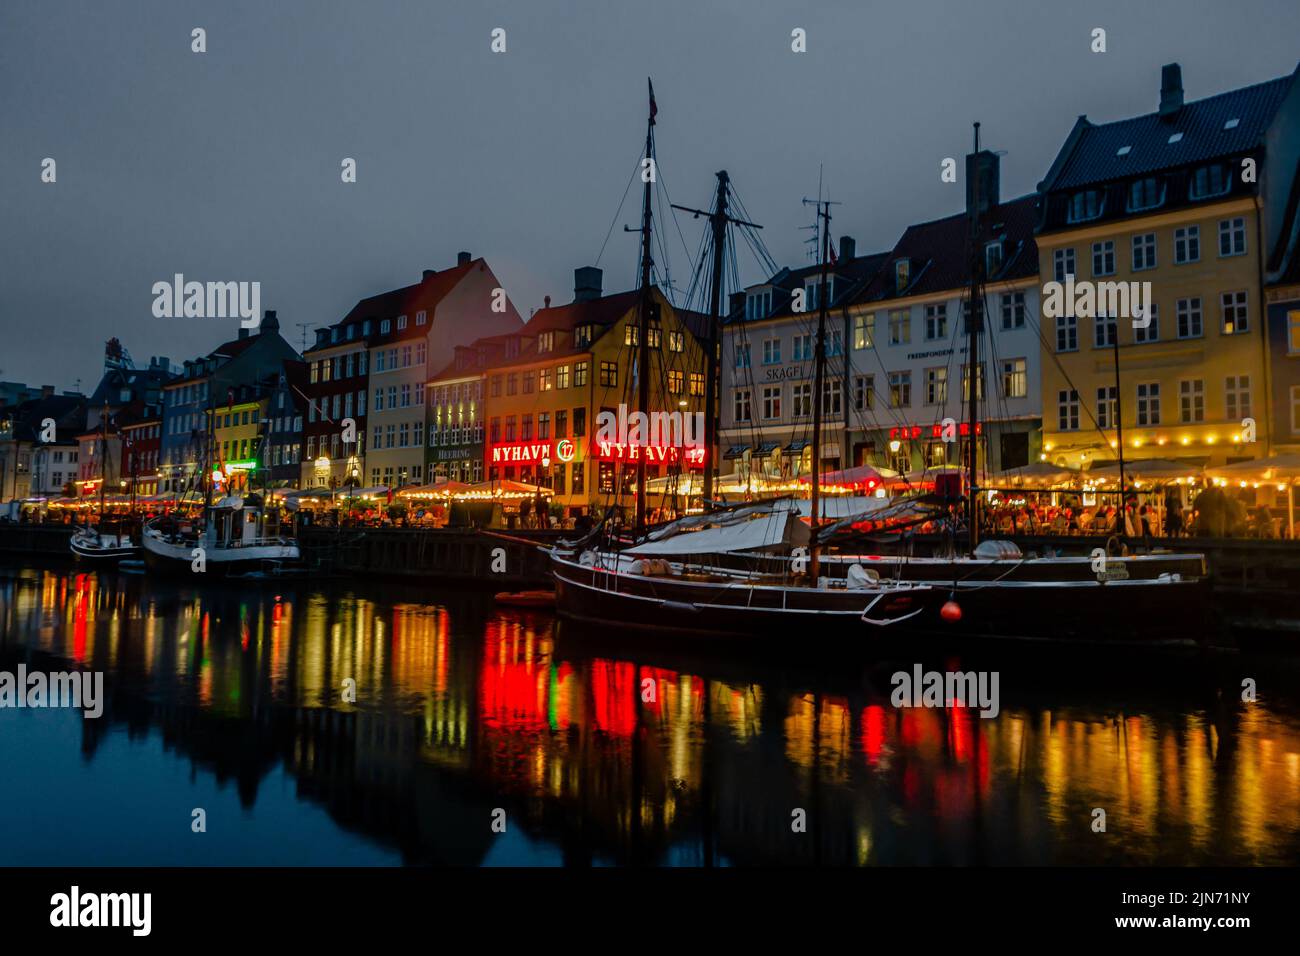 A beautiful shot of a famous tourist spot Nyhavn in Copenhagen with colorful buildings at night Stock Photo